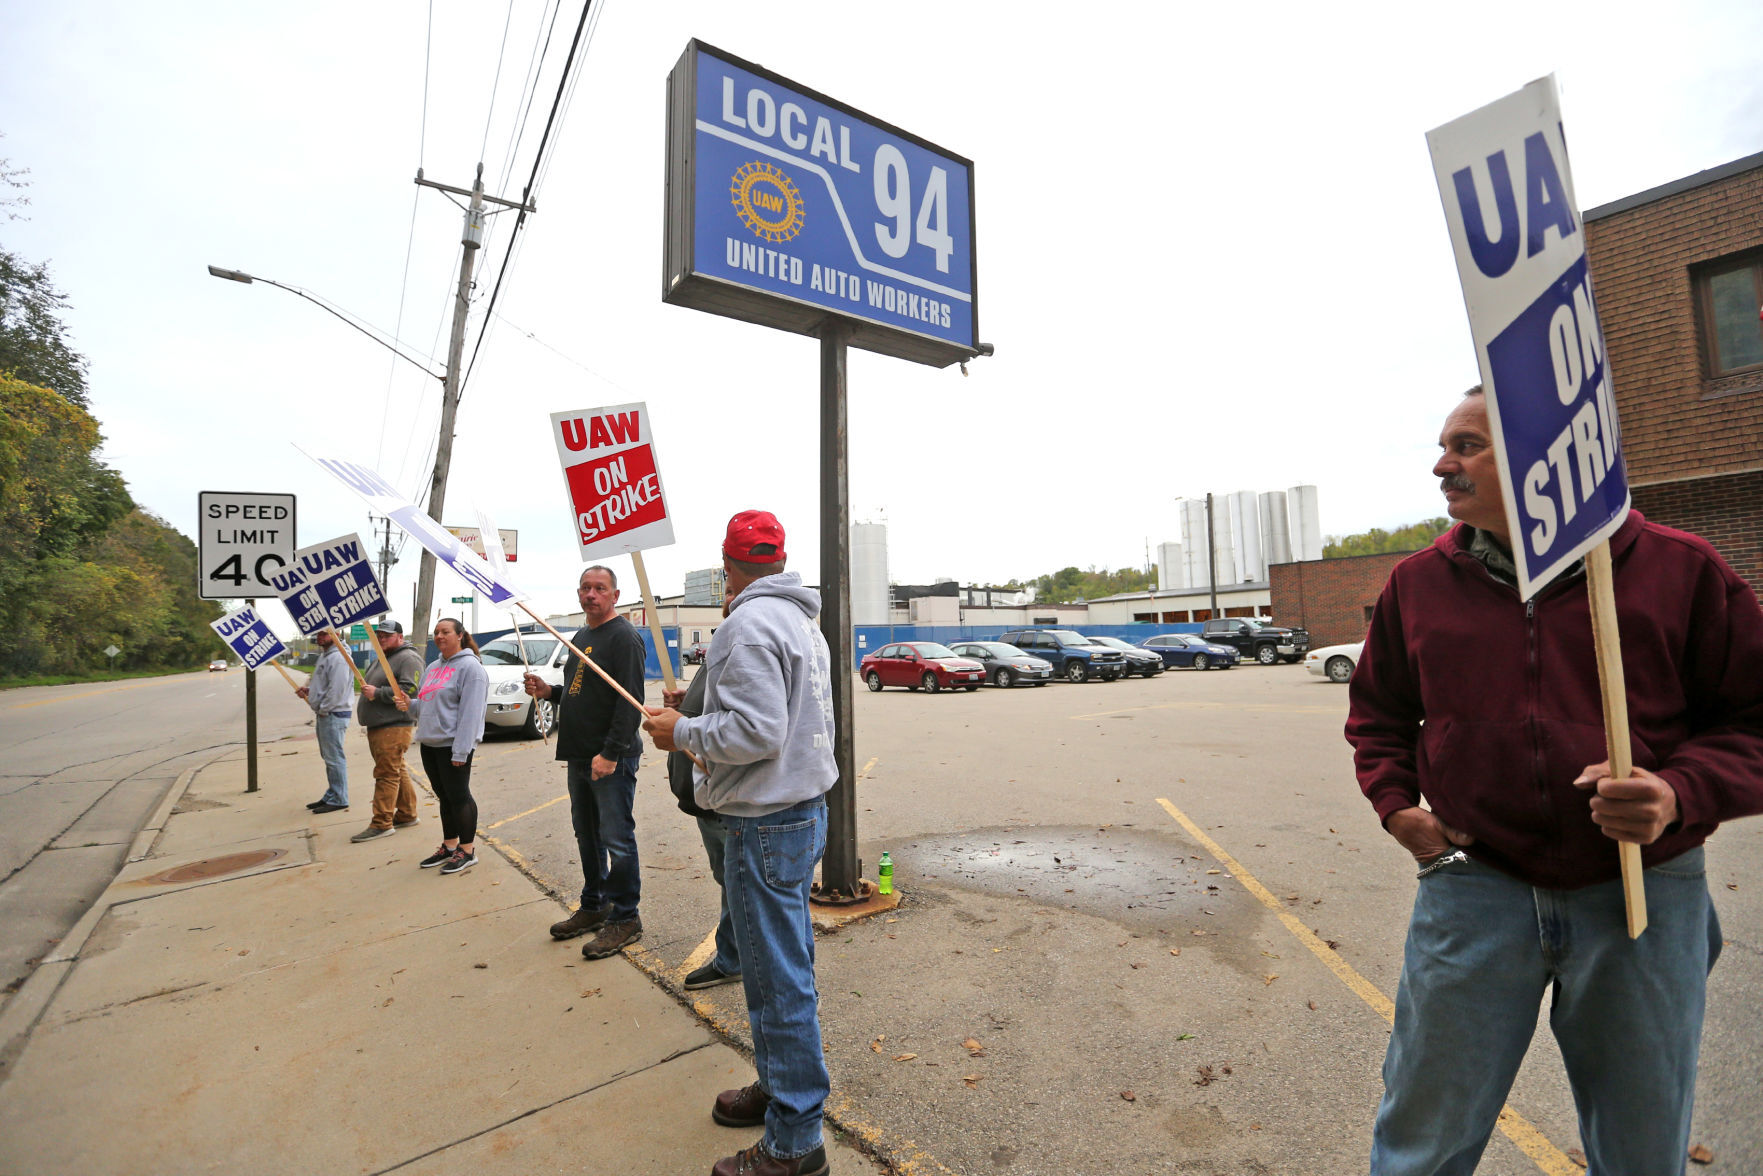 John Deere Dubuque Works union employees picket outside UAW Local 94 in Dubuque on Thursday, Oct. 14, 2021.    PHOTO CREDIT: JESSICA REILLY